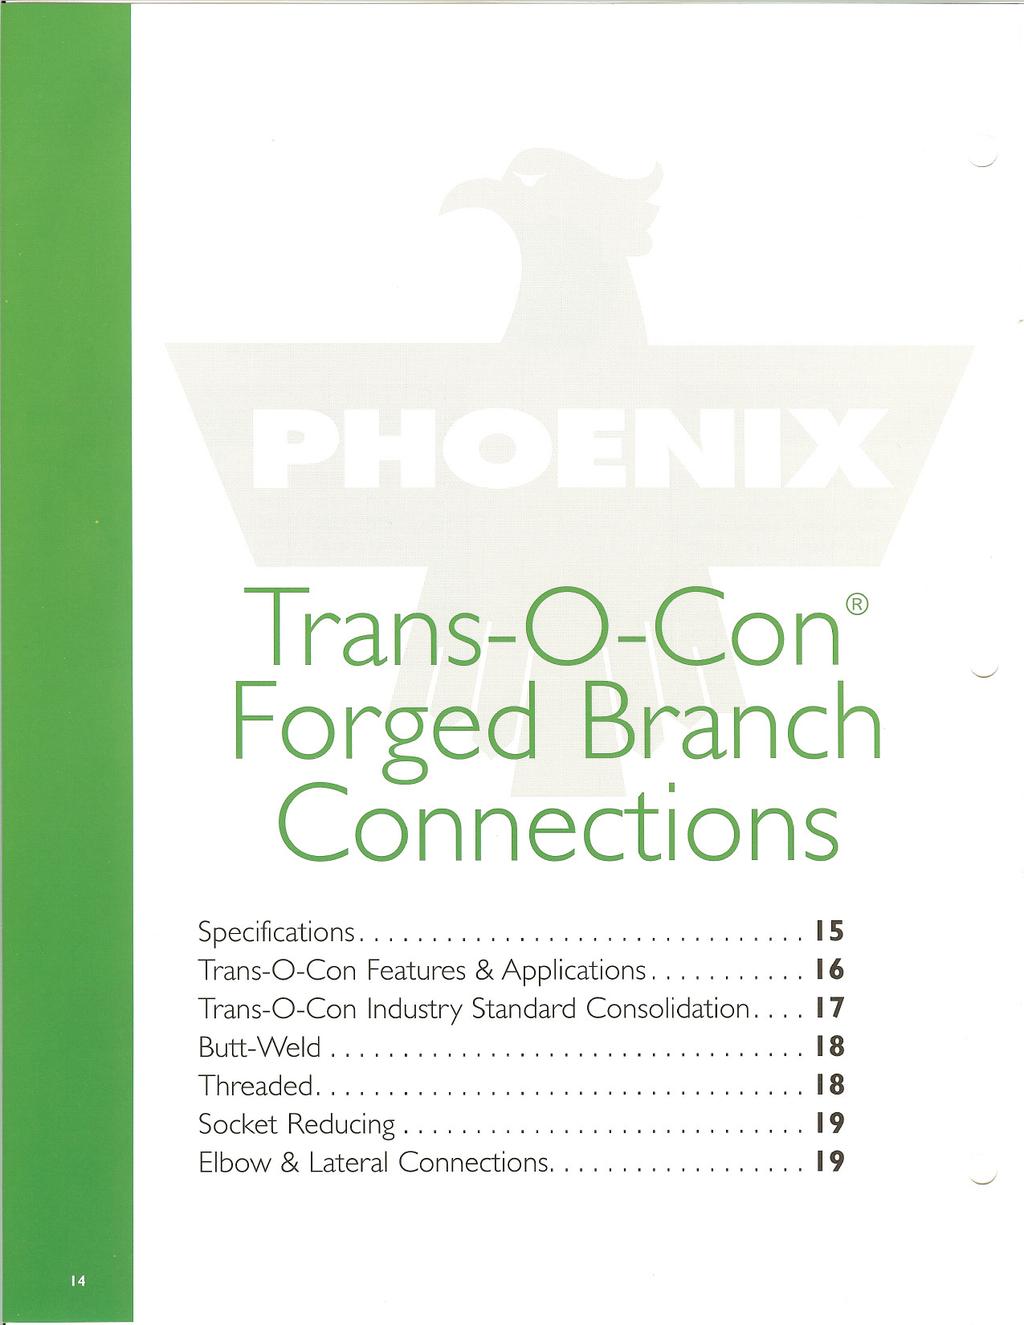 Trans-O-Con@ Forged Branch Connections Specifications............................... 15 Trans-O-Con Features &Applications........... 16 Trans-O-Con Industry Standard Consolidation.